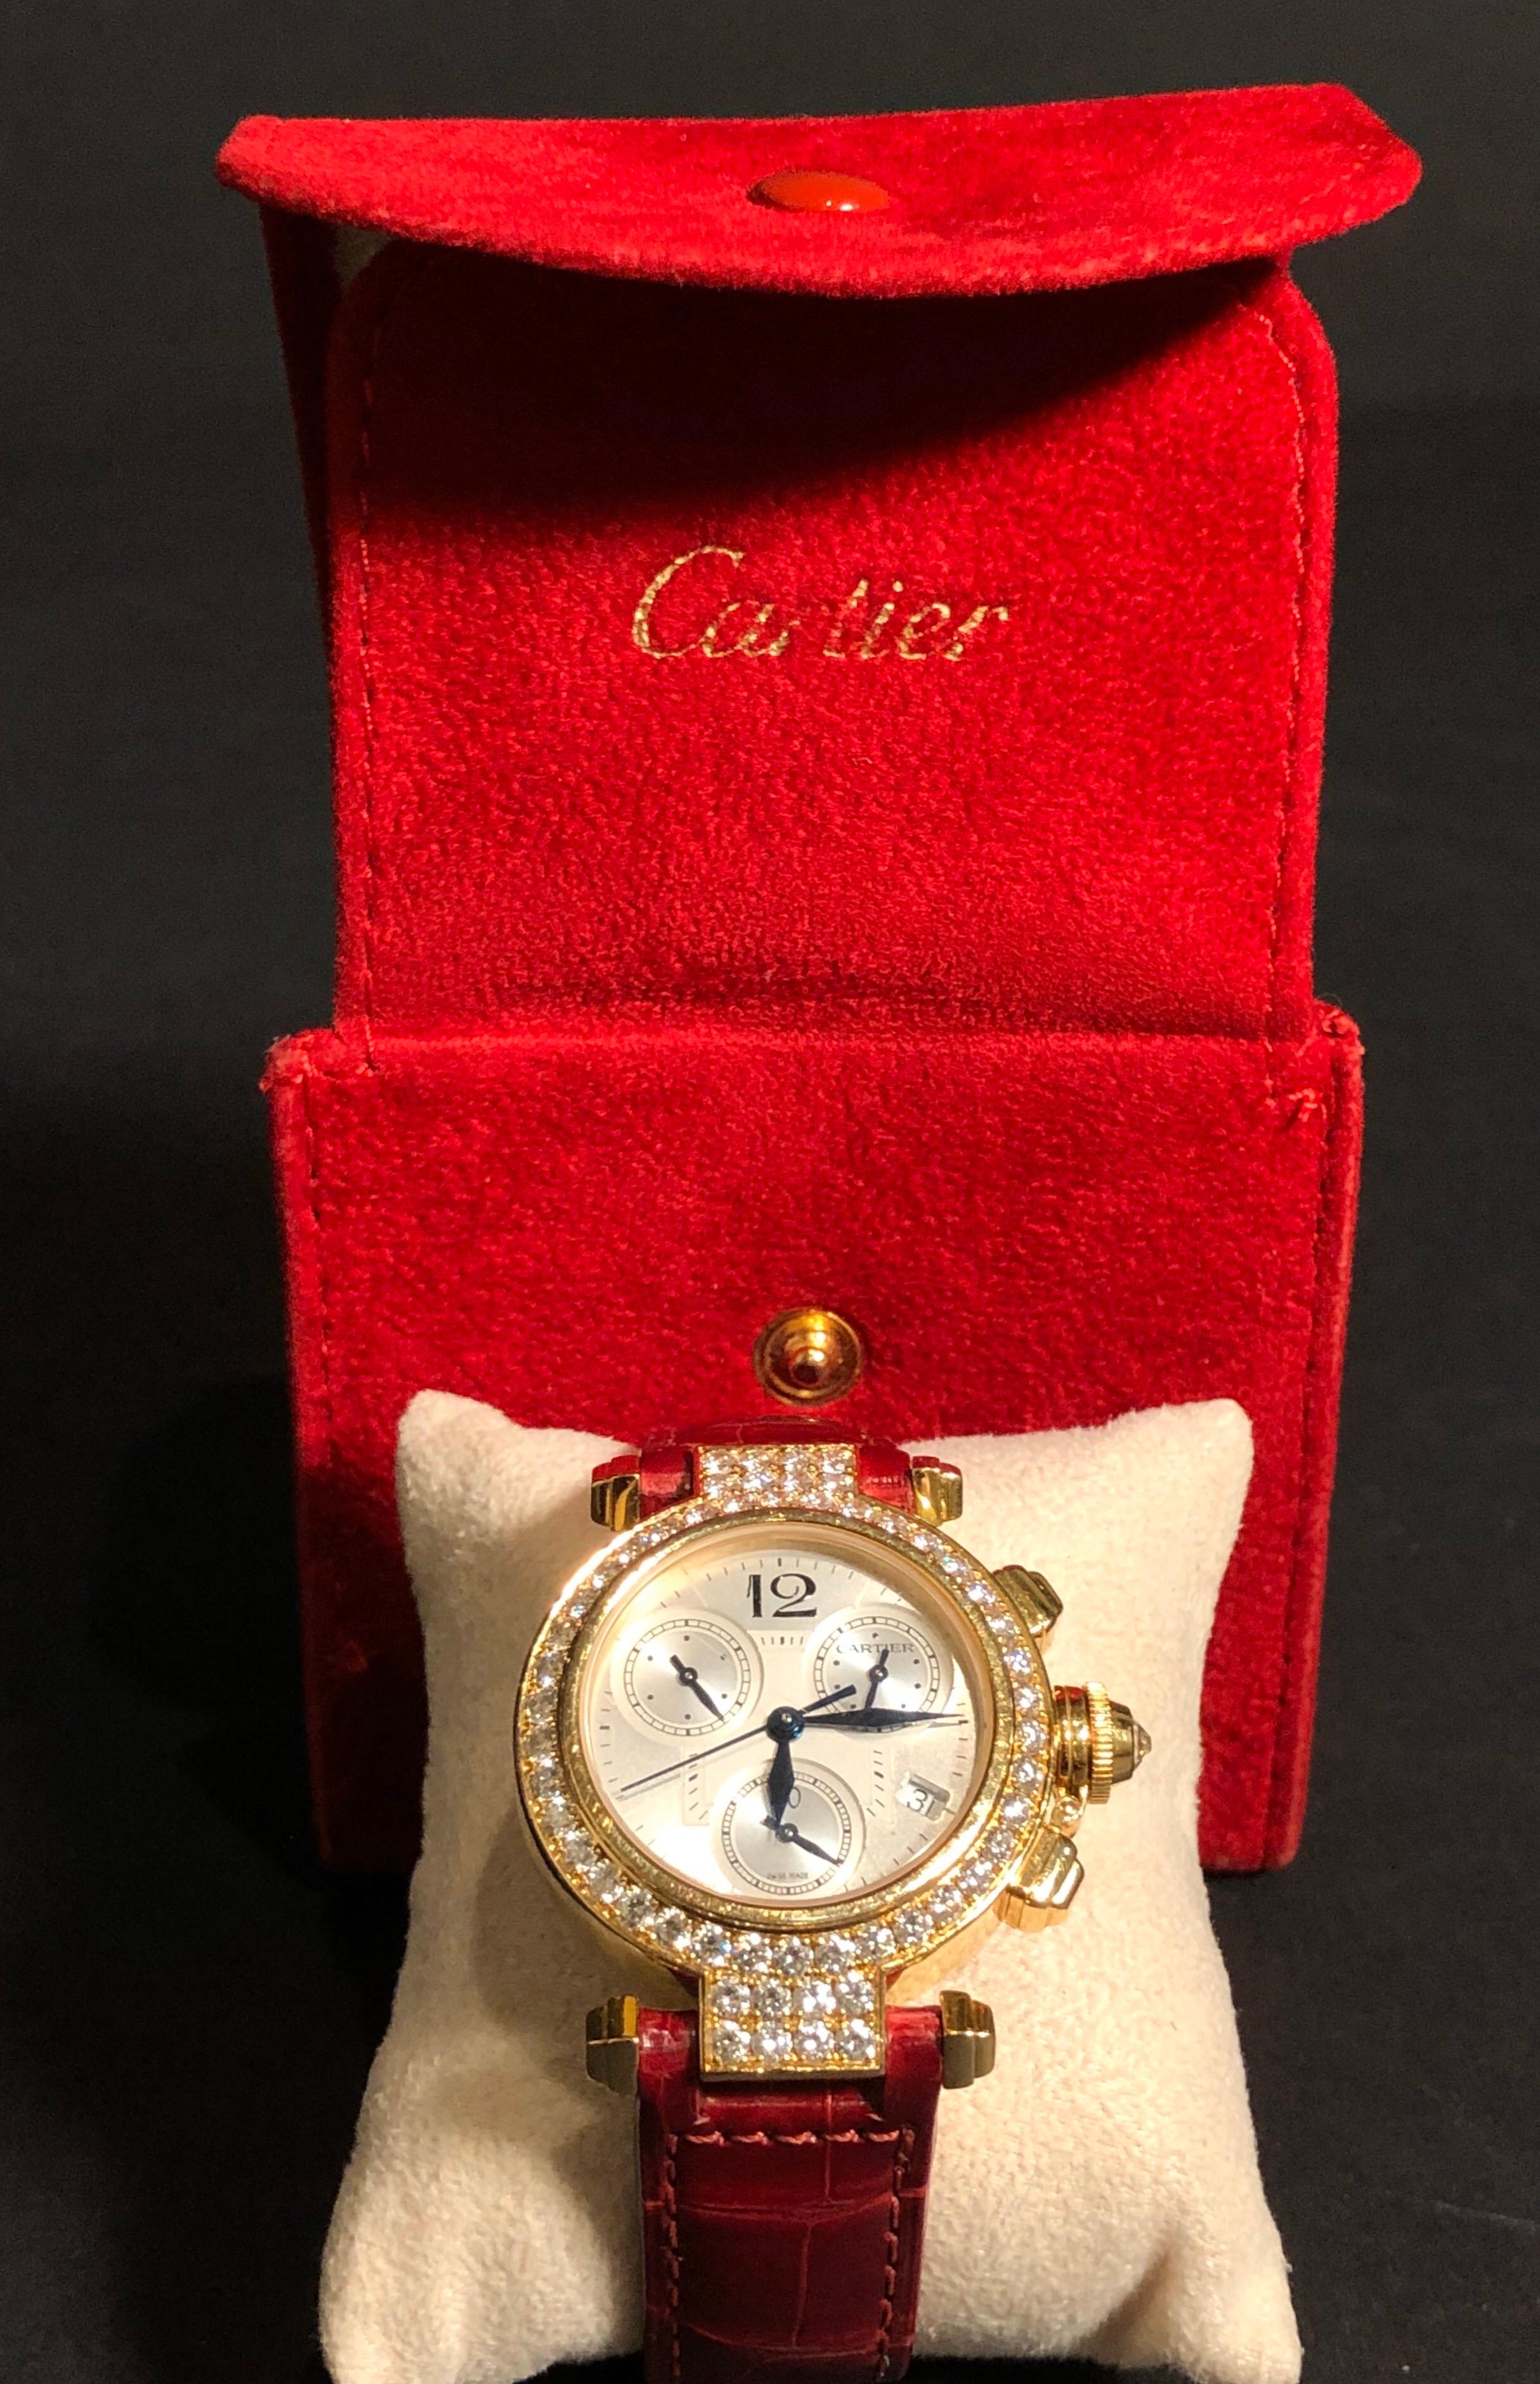 Cartier Pasha 18 karat yellow gold and diamond ladies watch on red leather strap band - Quartz movement. Three sub dials and date window. 18-karat yellow gold with factory diamond bezel and diamonds that flow over the lugs. Red strap band with